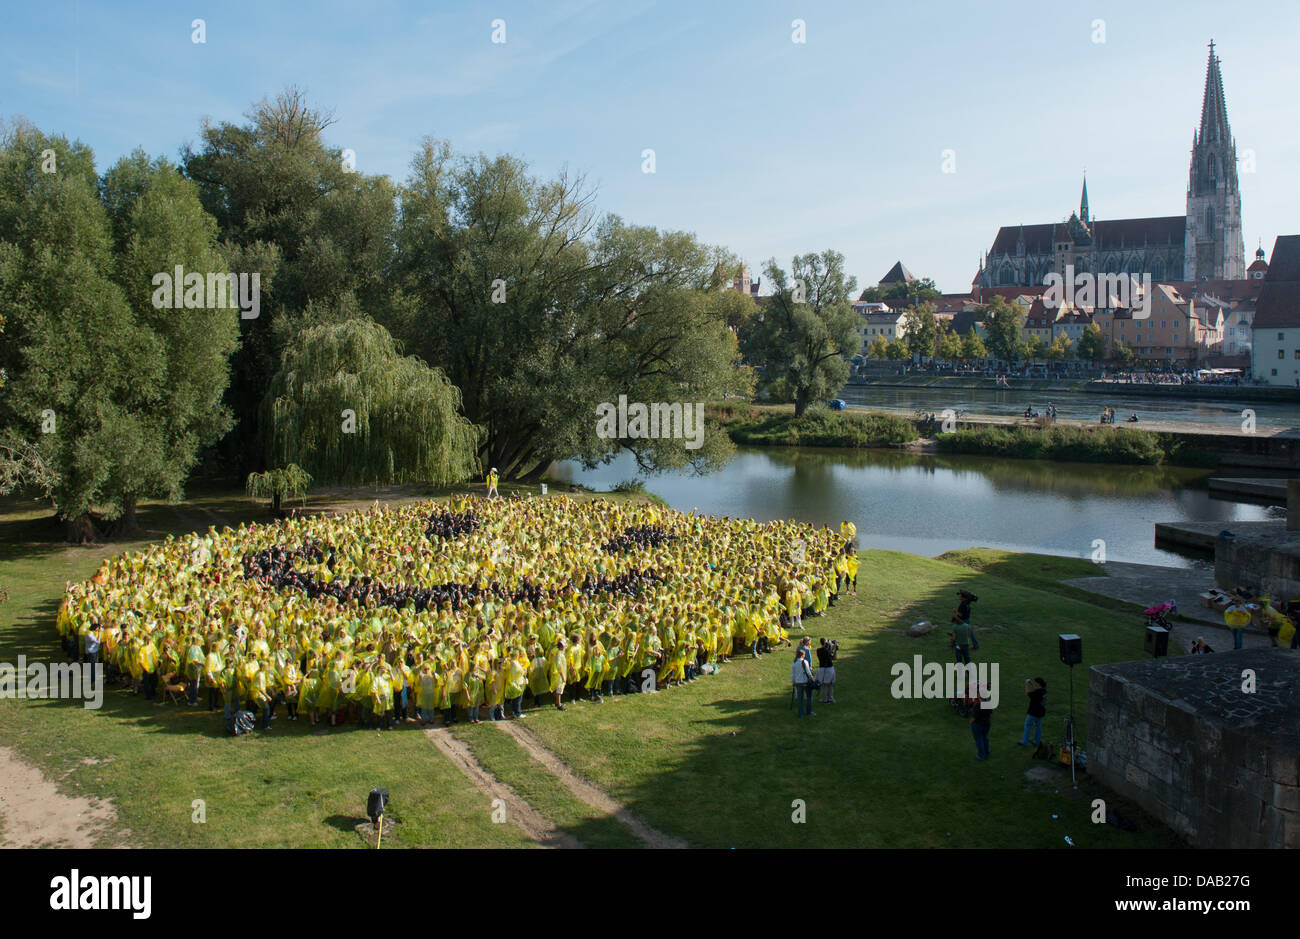 Numerous people stand wearing yellow and black raincaps on the Jahn Island and form a smiley in Regensburg, Germany, 24 September 2011. Organizers wanted to break the record for the largest smiley made of people with the action 'Regensburg smiles' with almost 3000 participants. Unfortunately, only around half of the participants came. Photo: ARMIN WEIGEL Stock Photo